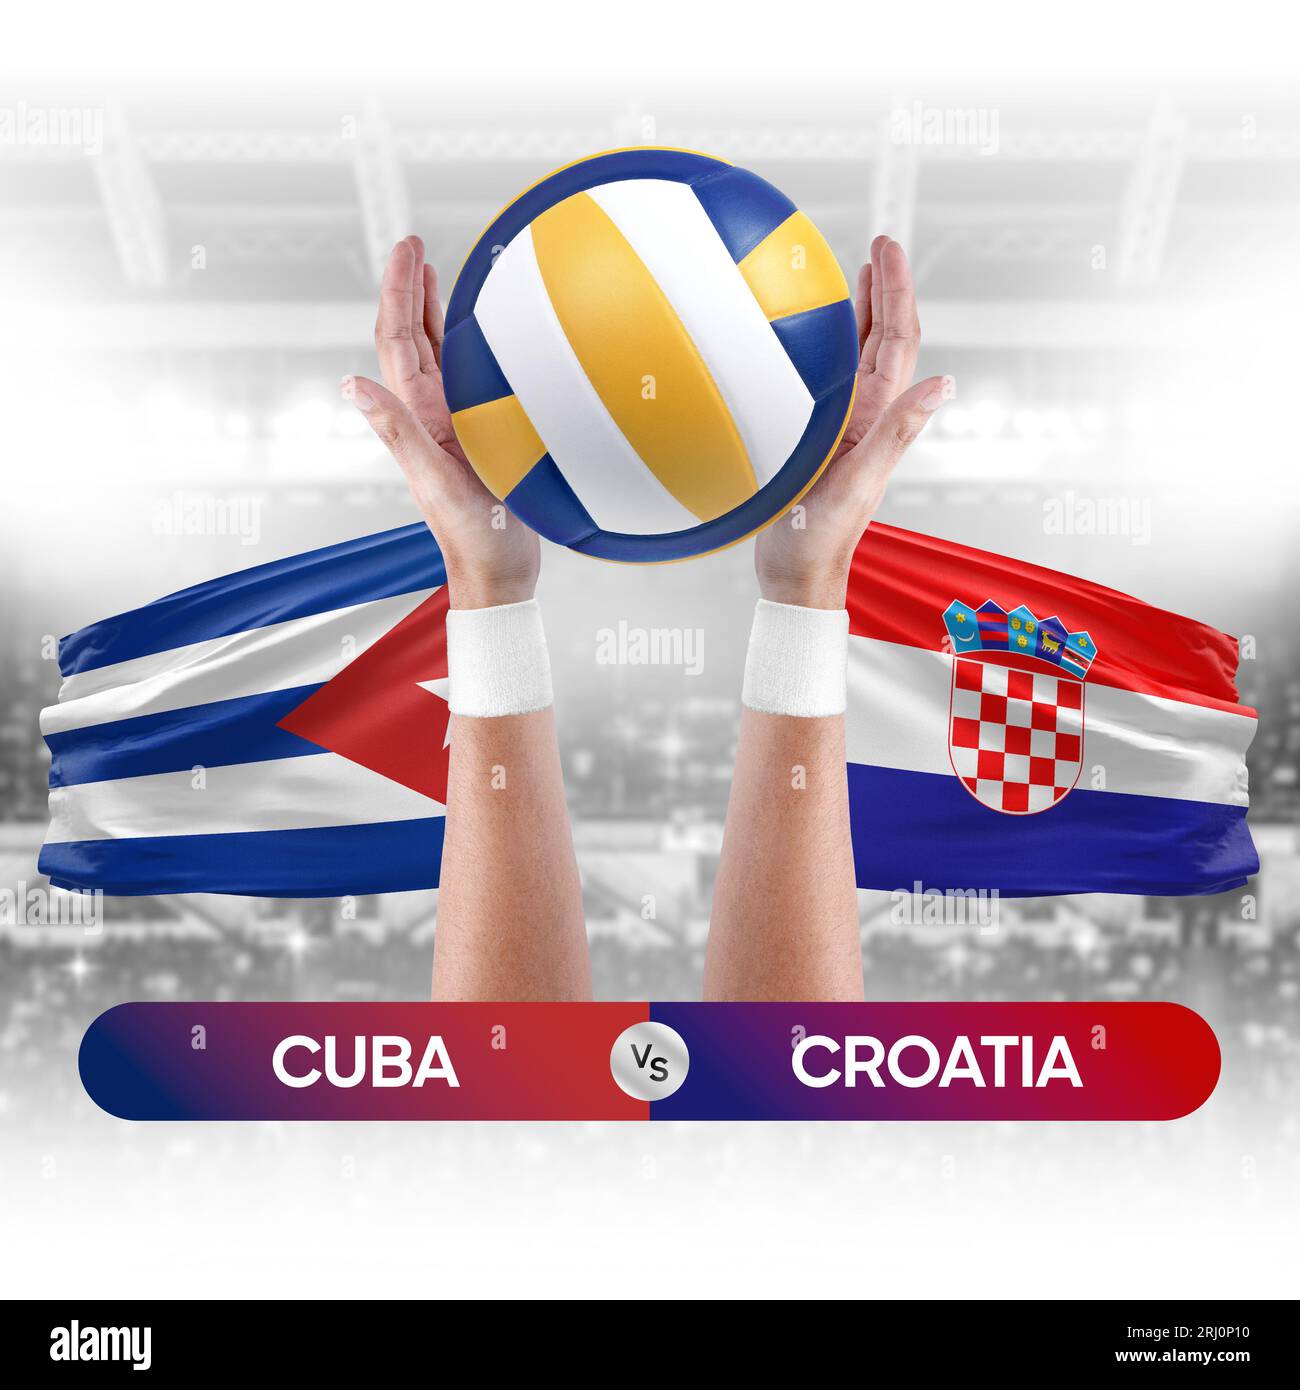 Cuba vs Croatia national teams volleyball volley ball match competition concept. Stock Photo